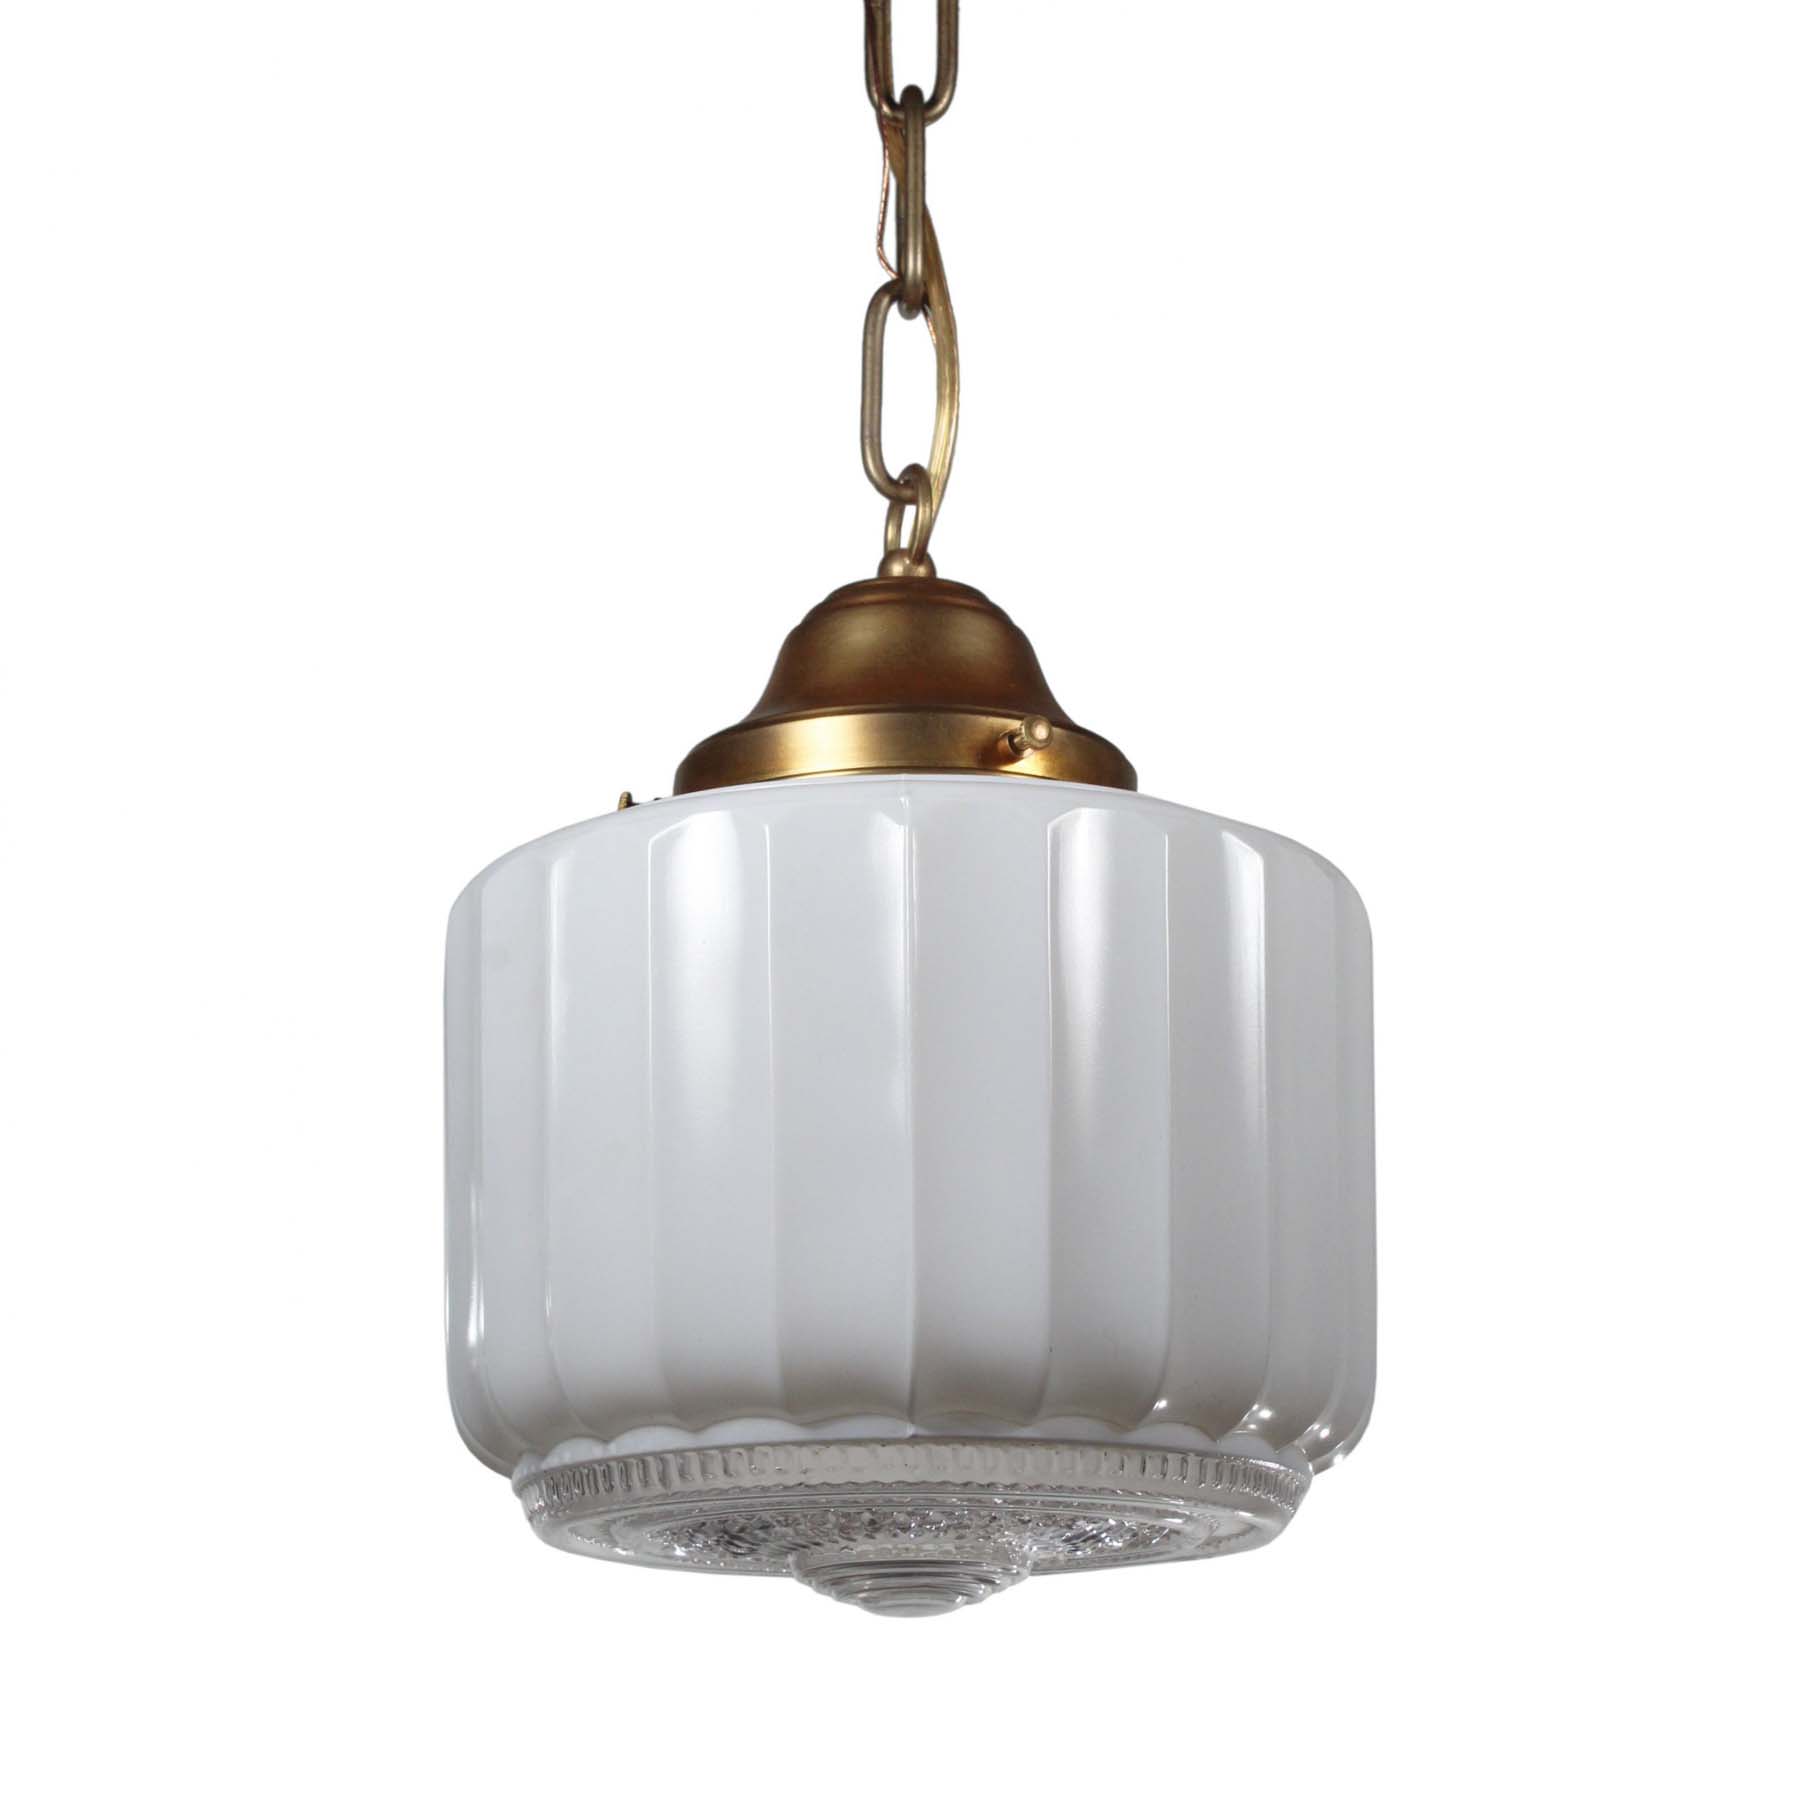 SOLD Matching Antique Pendant Lights with Unusual Shade-72346